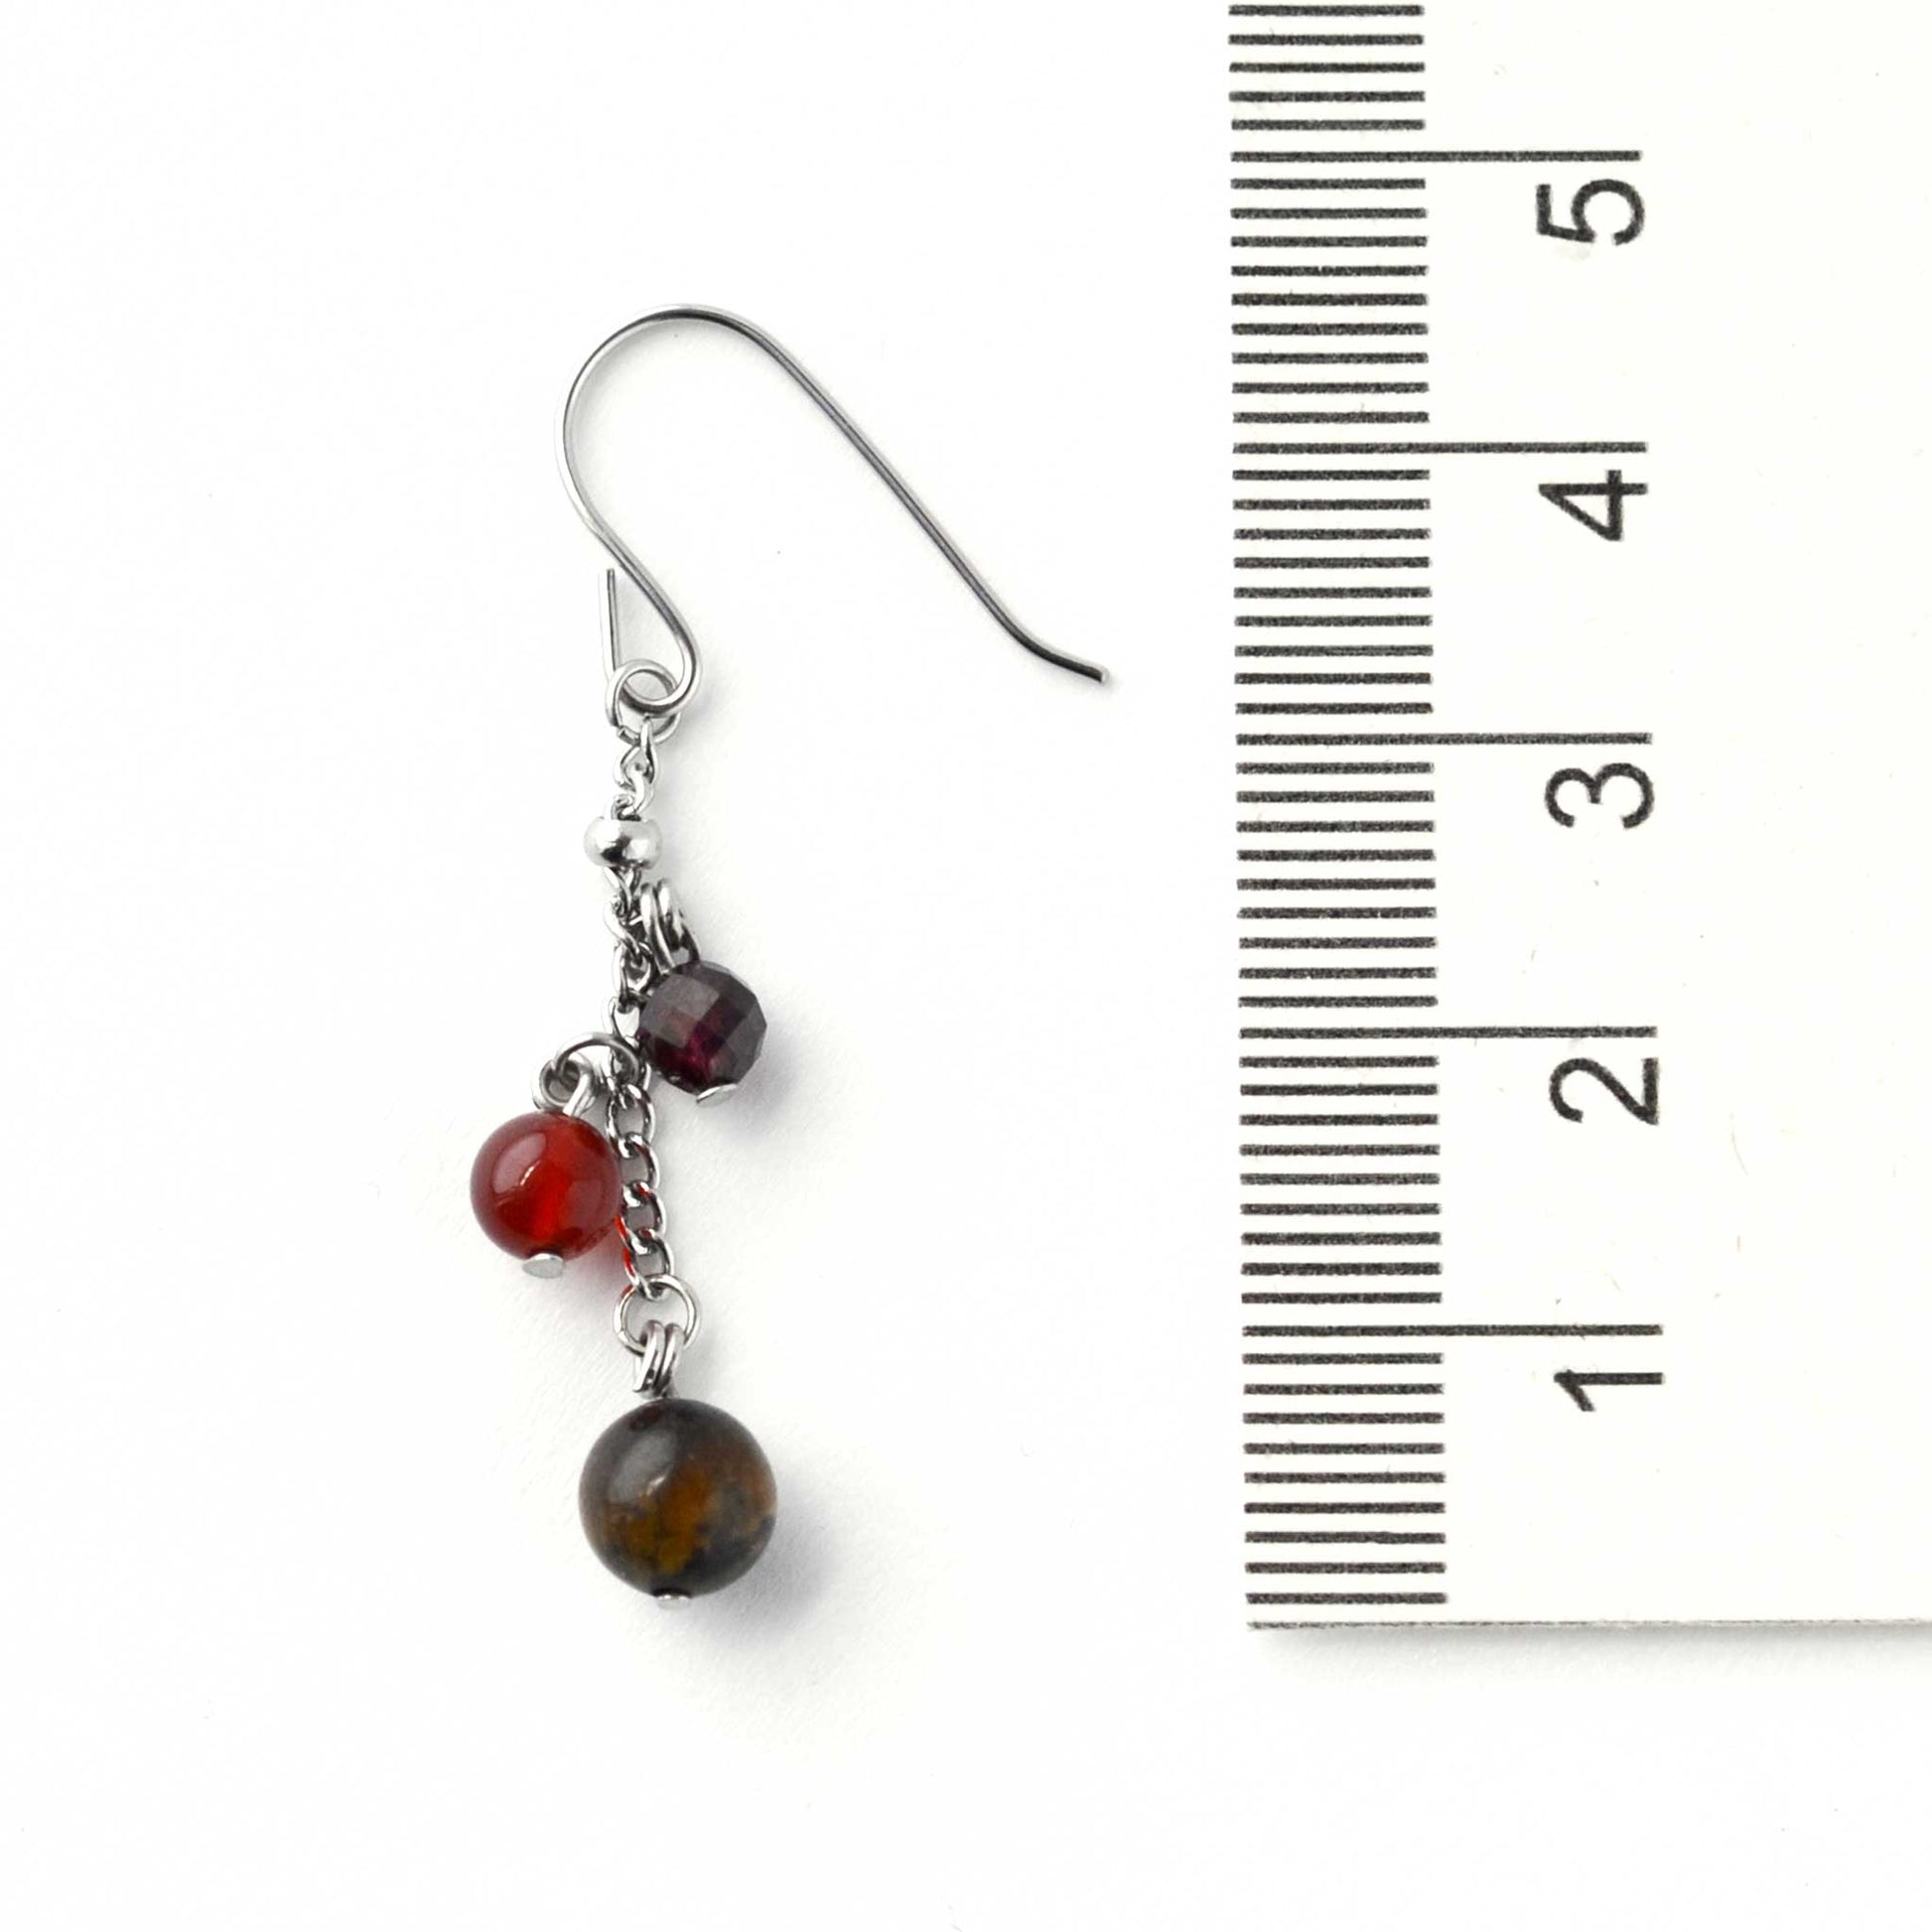 Brown, orange and red gemstone bead drop earring next to ruler showing 4.5cm length